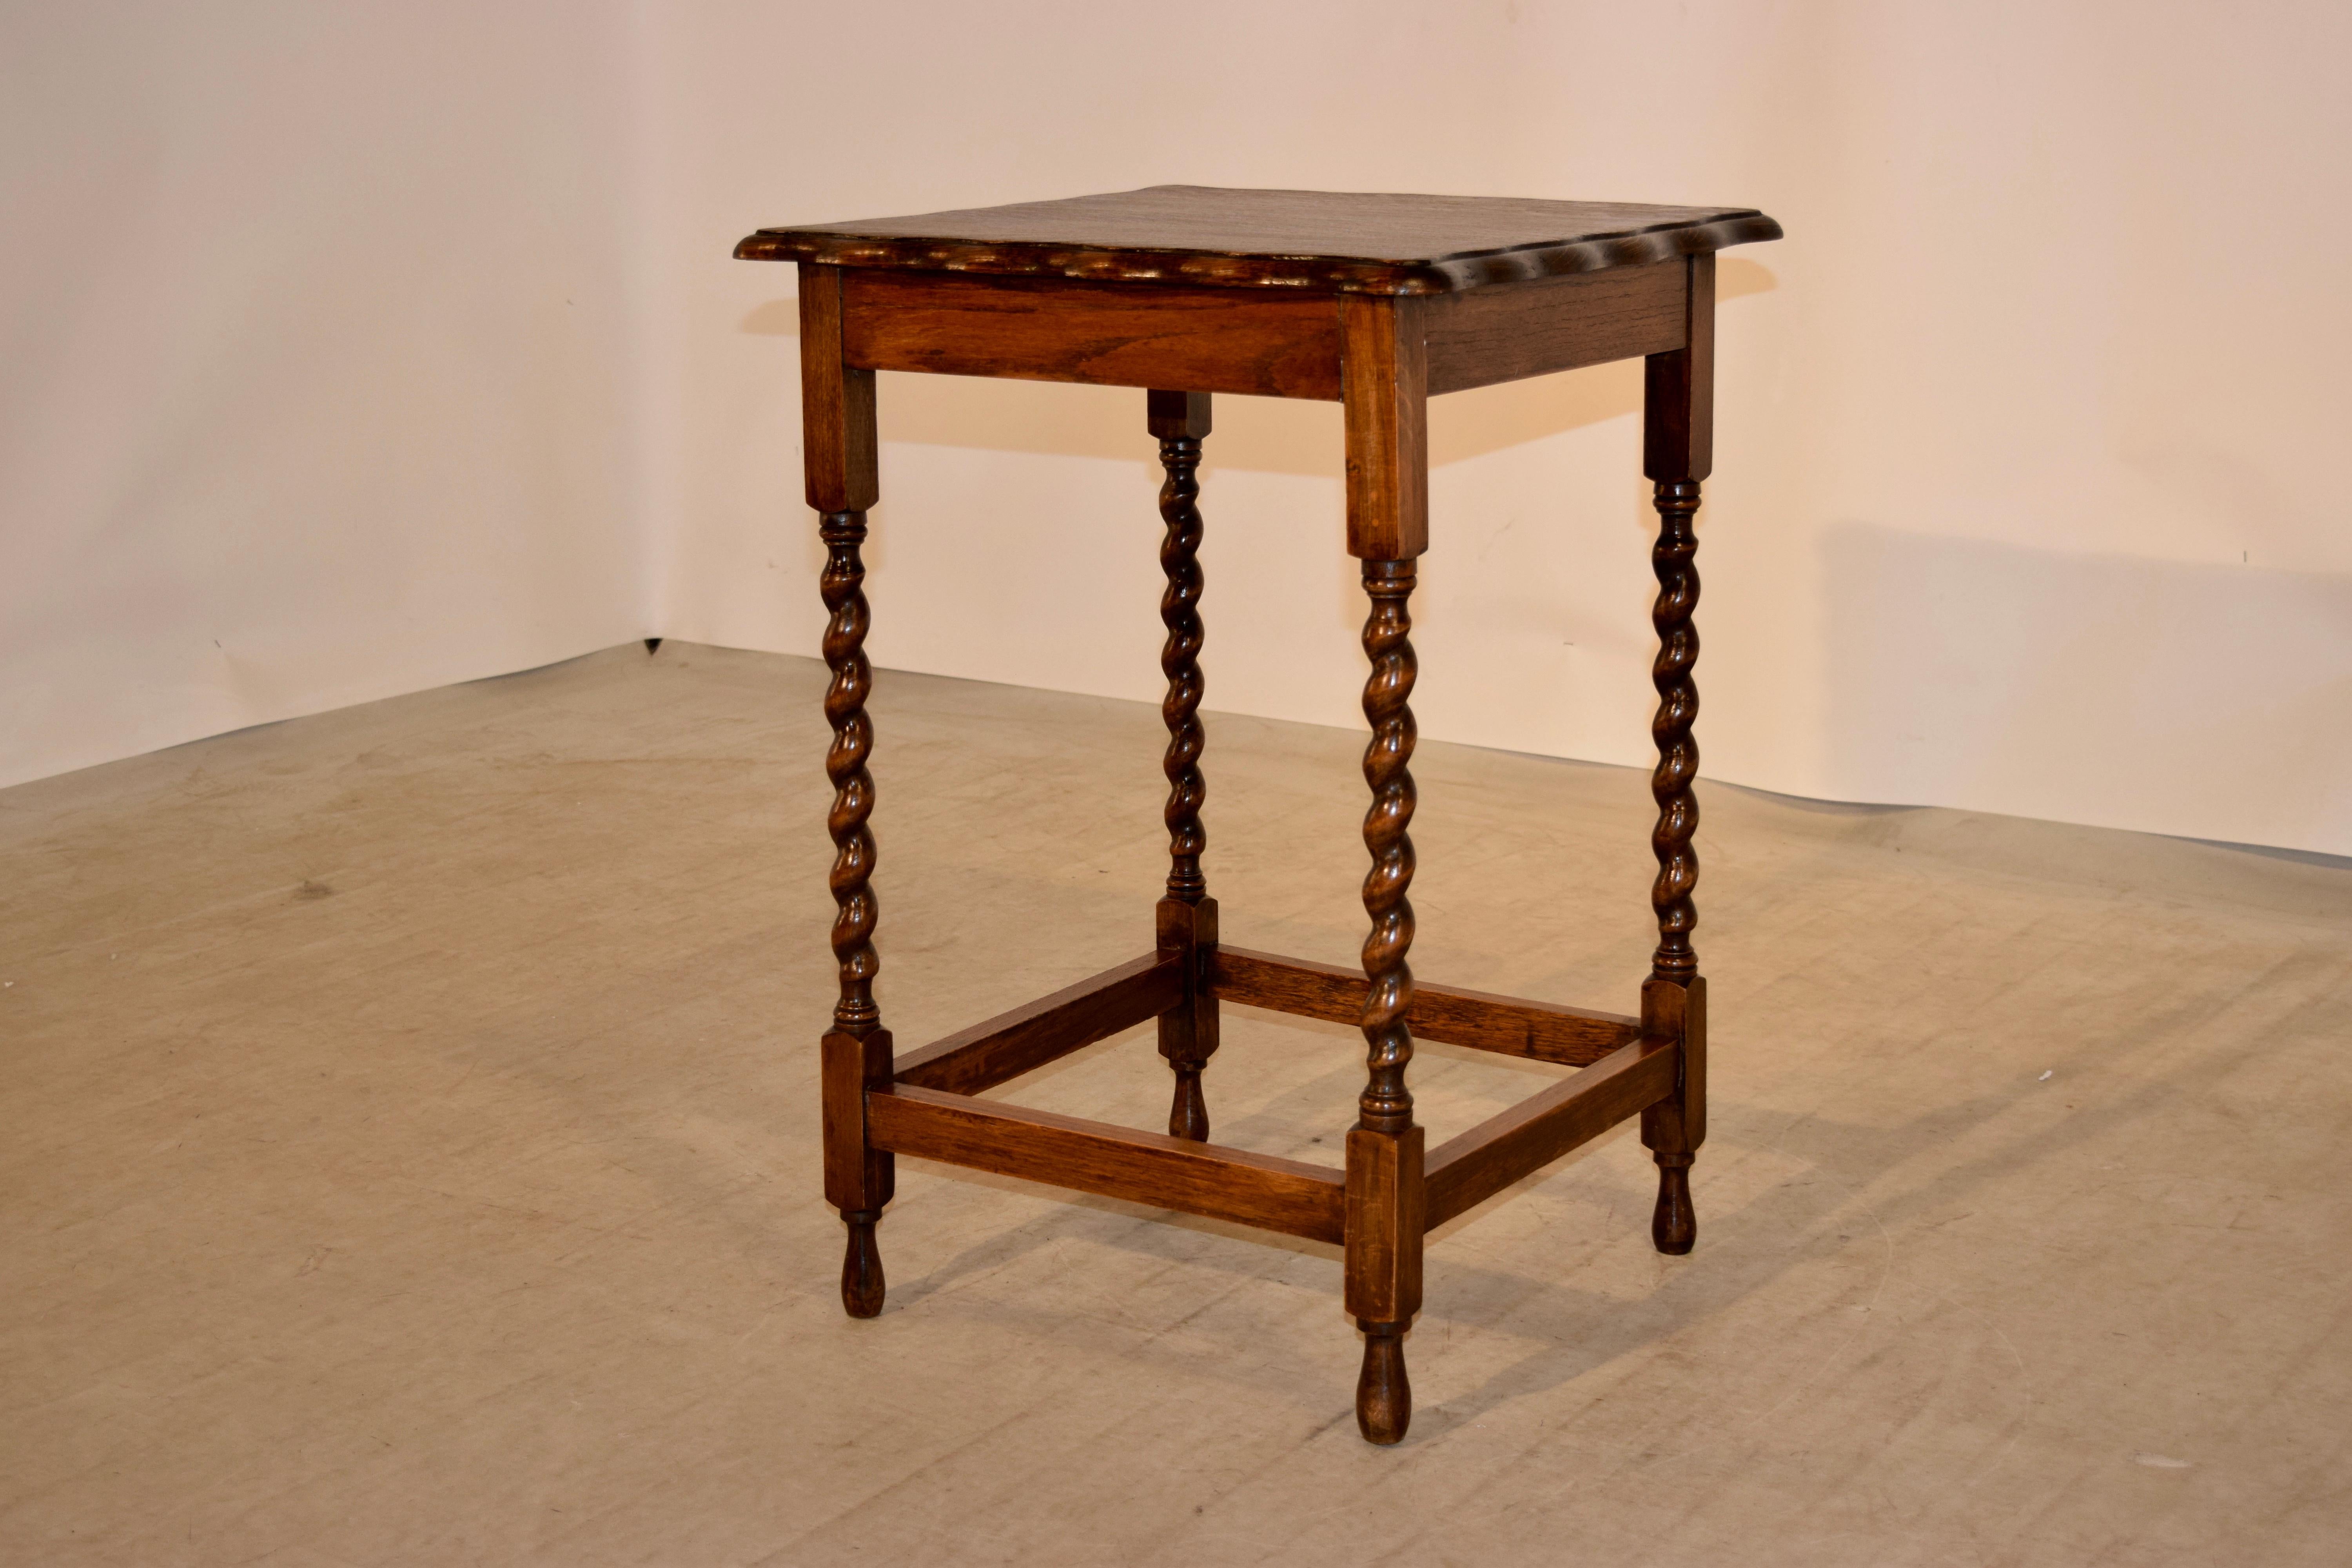 English oak side table with a scalloped and beveled edge around the top following down to a simple apron and supported on hand turned barley twist legs joined by stretchers and raised on hand turned feet, circa 1900.